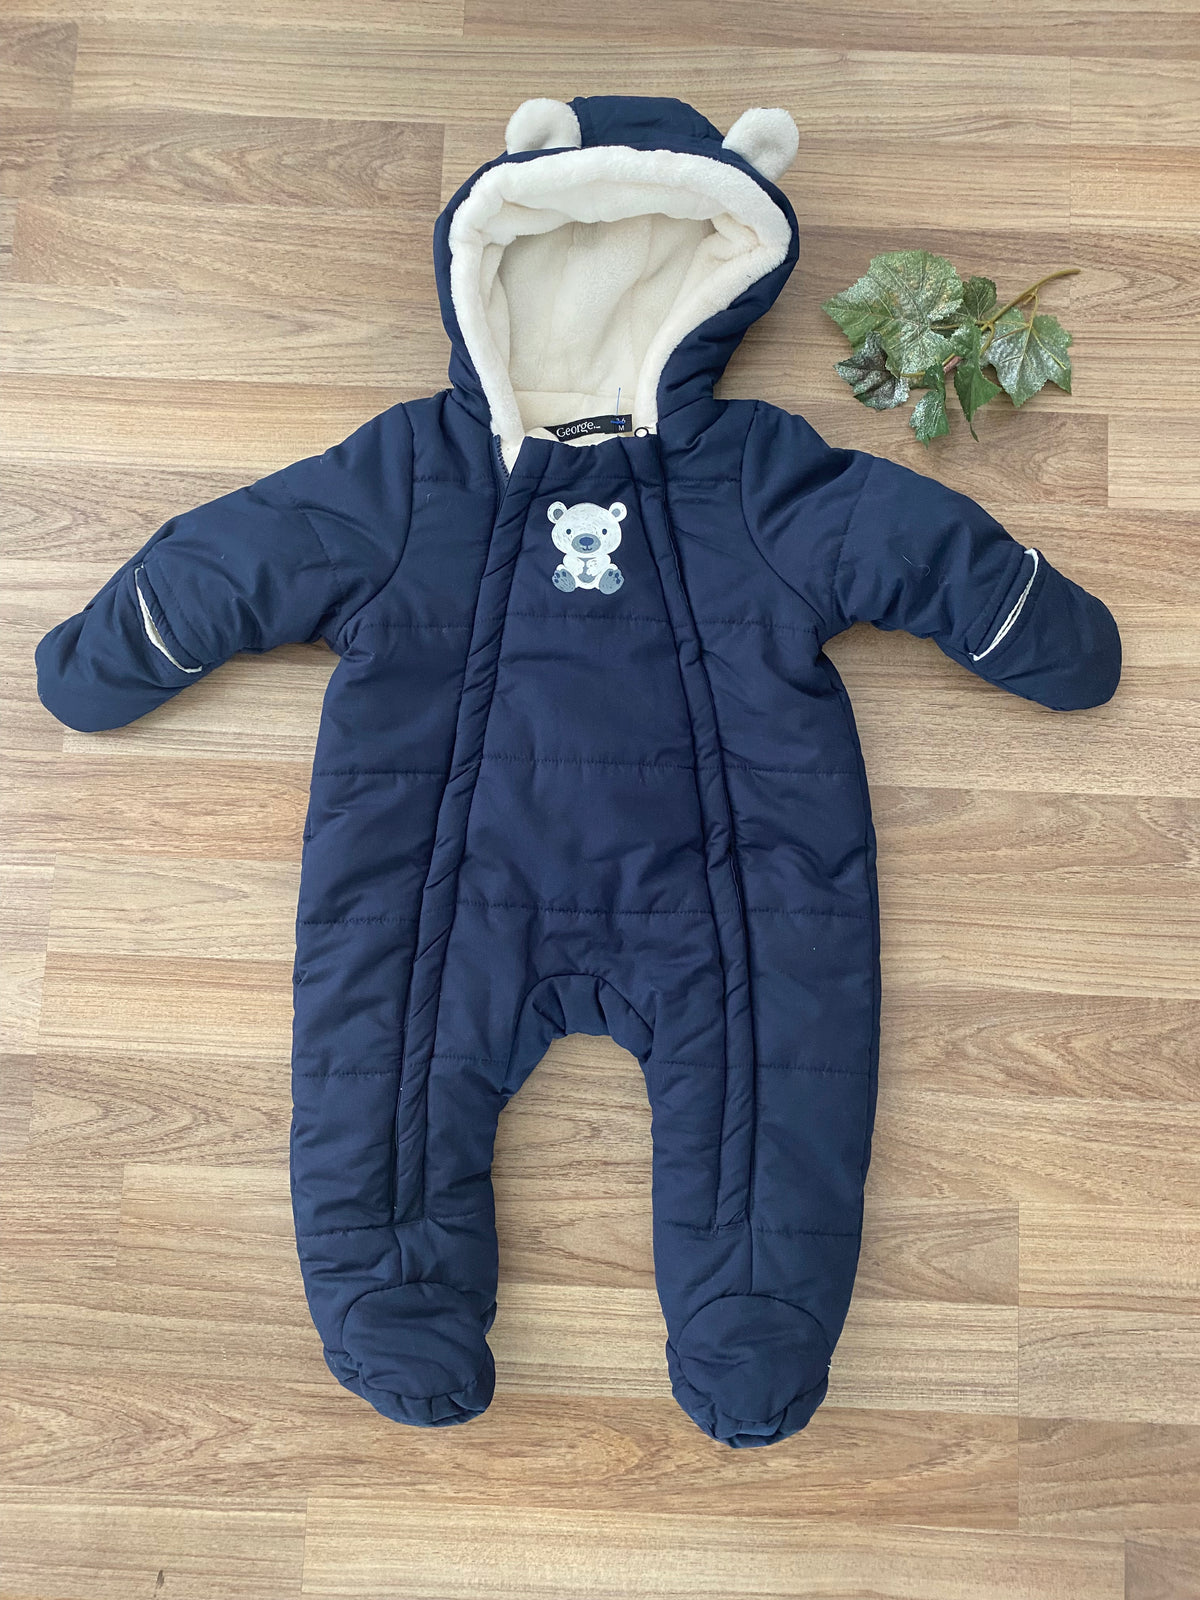 Full Zip Hooded Bunting Snow Suit (Boys Size 3-6M)